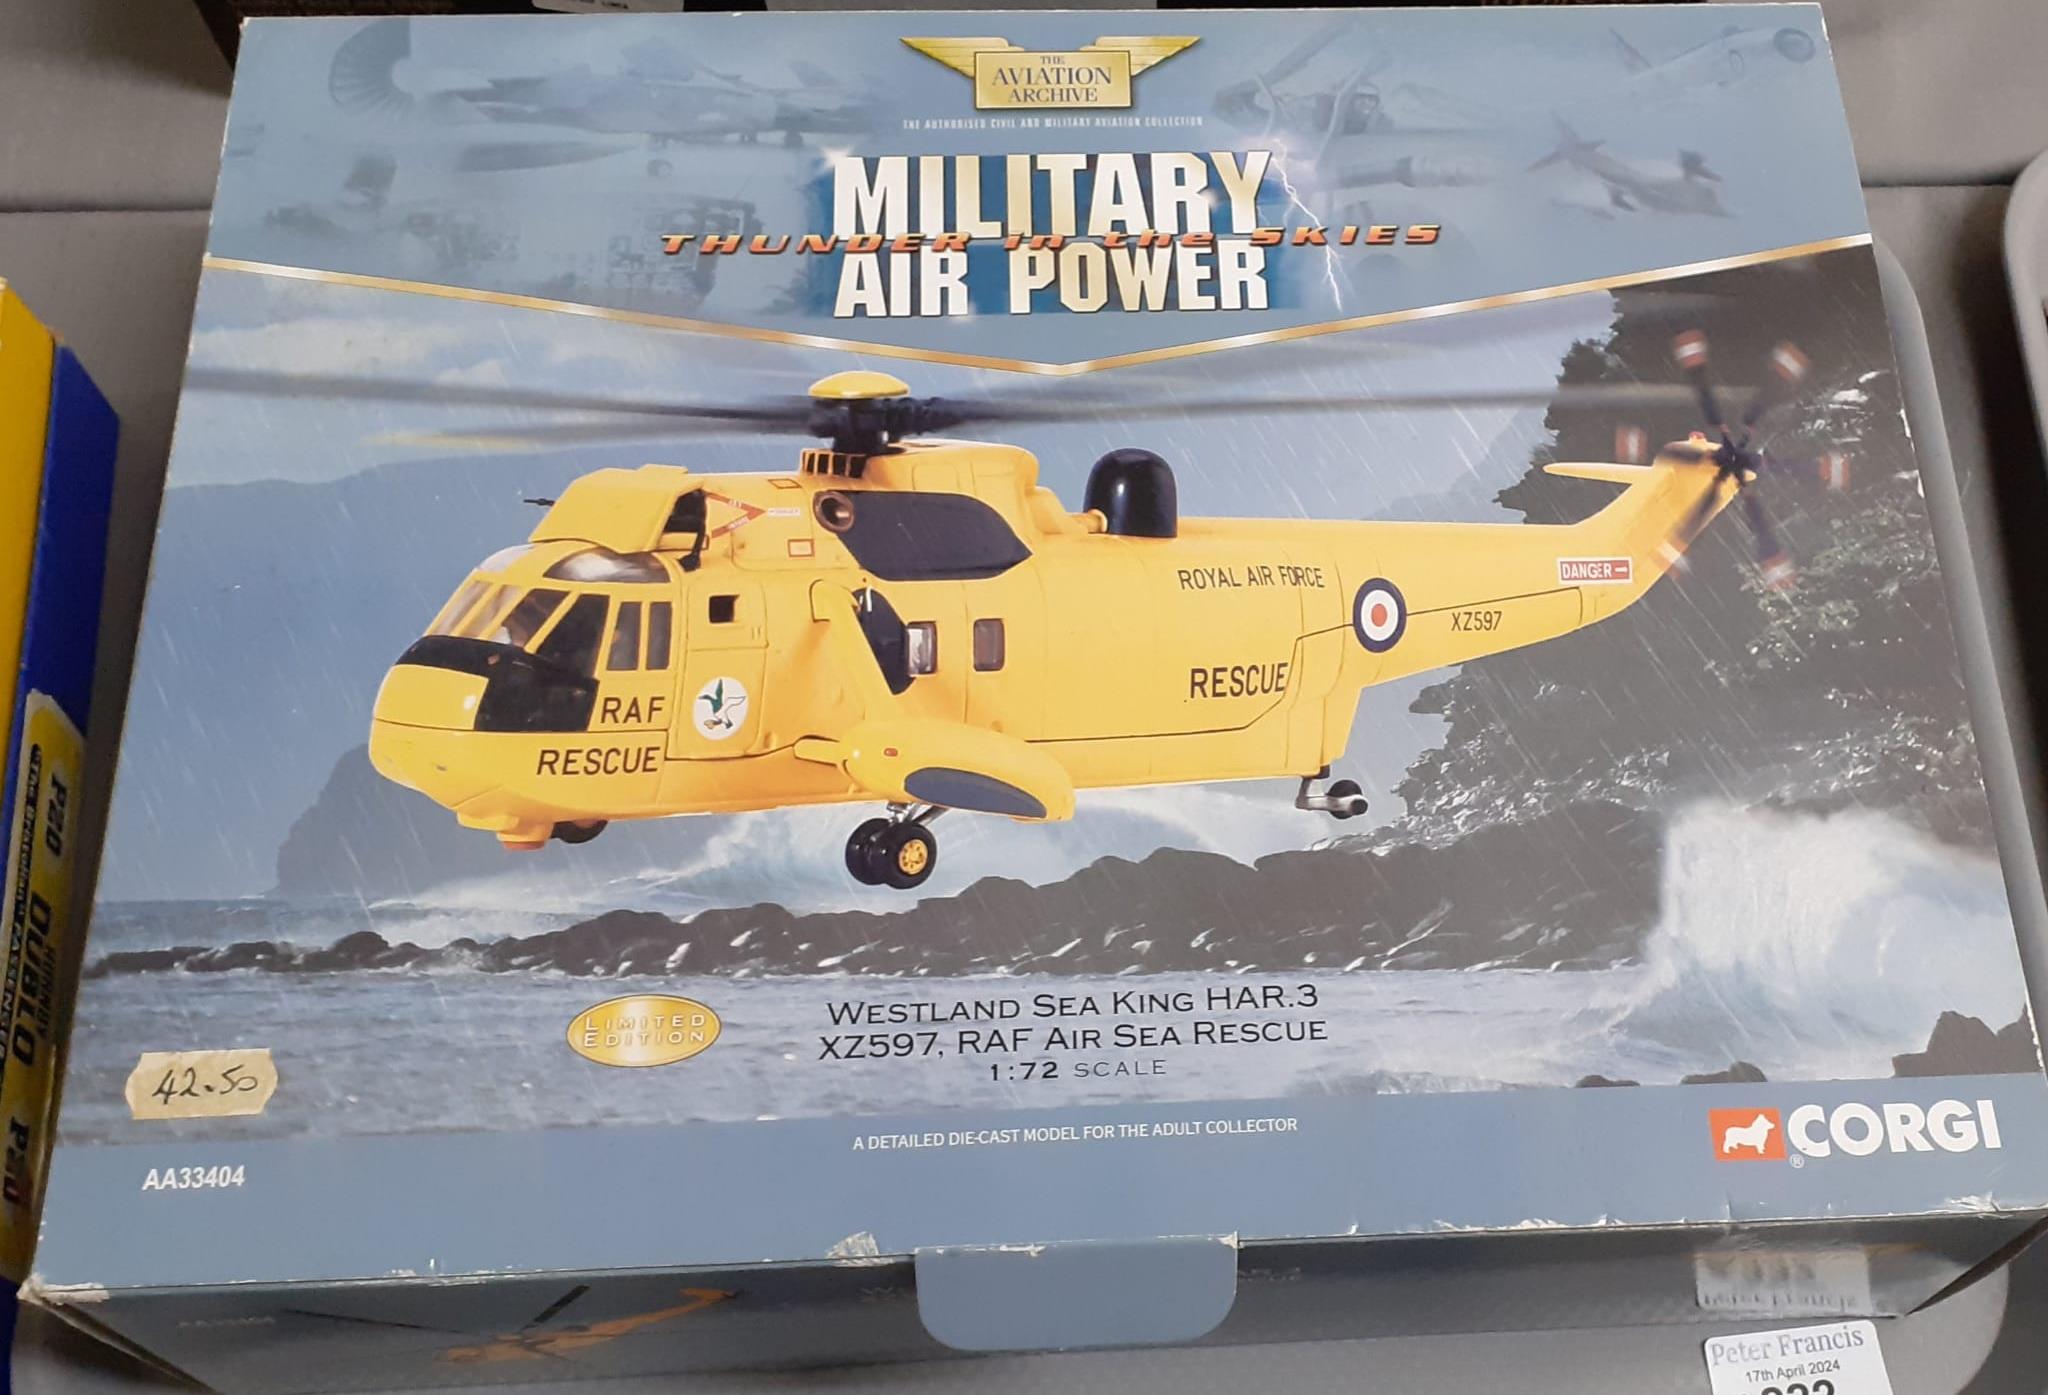 Corgi the Aviation Archive 1:72 scale Military Airpower thunder in the Skies Westland Sea King RAF